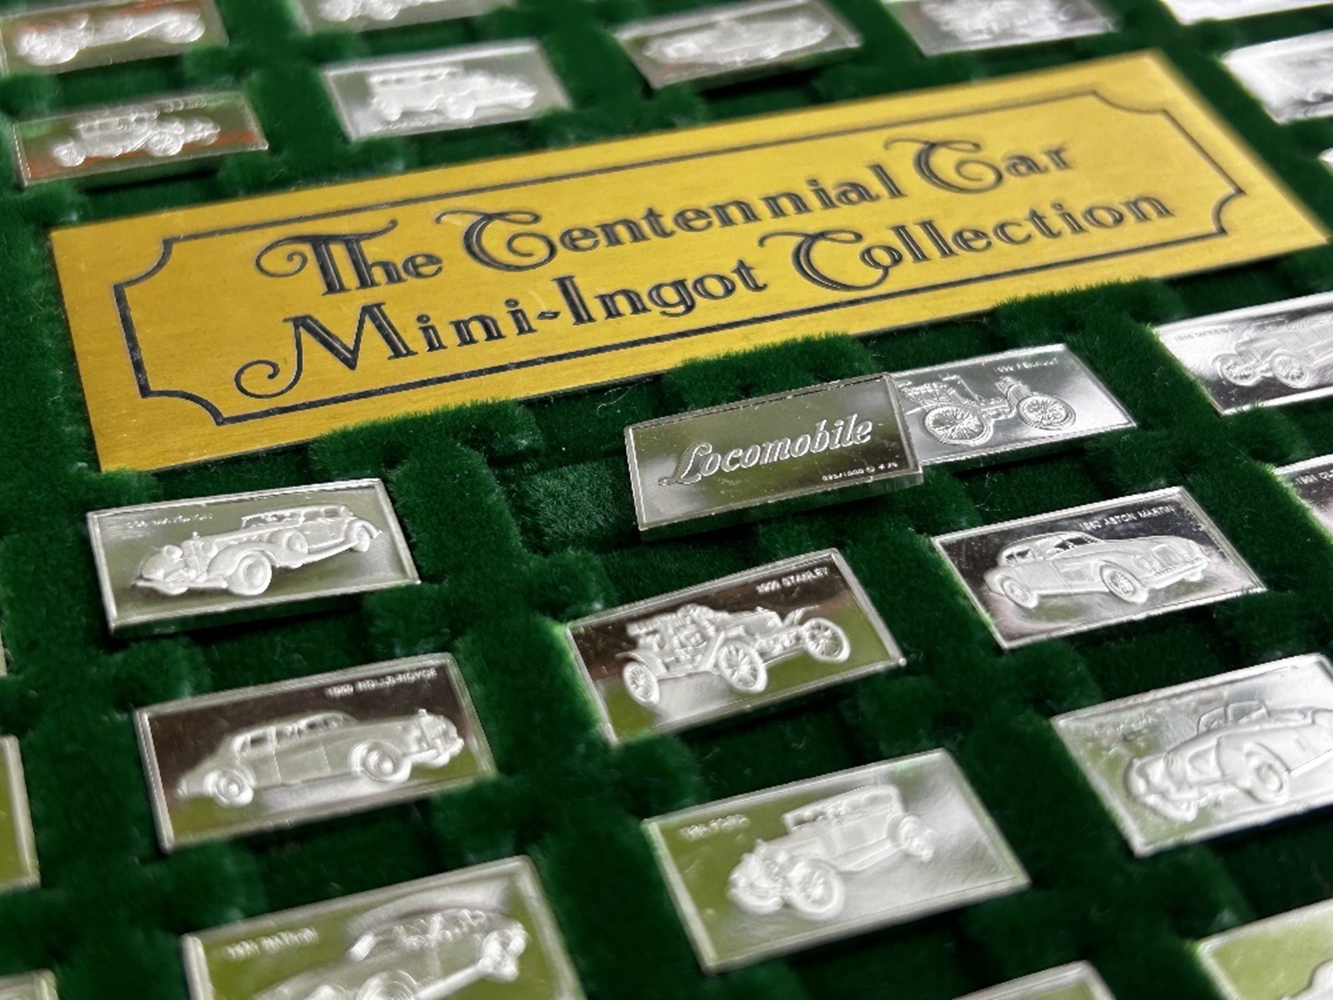 Franklin Mint &#8211; The Centennial Car Silver Mini Ingot Collection - Image 3 of 12